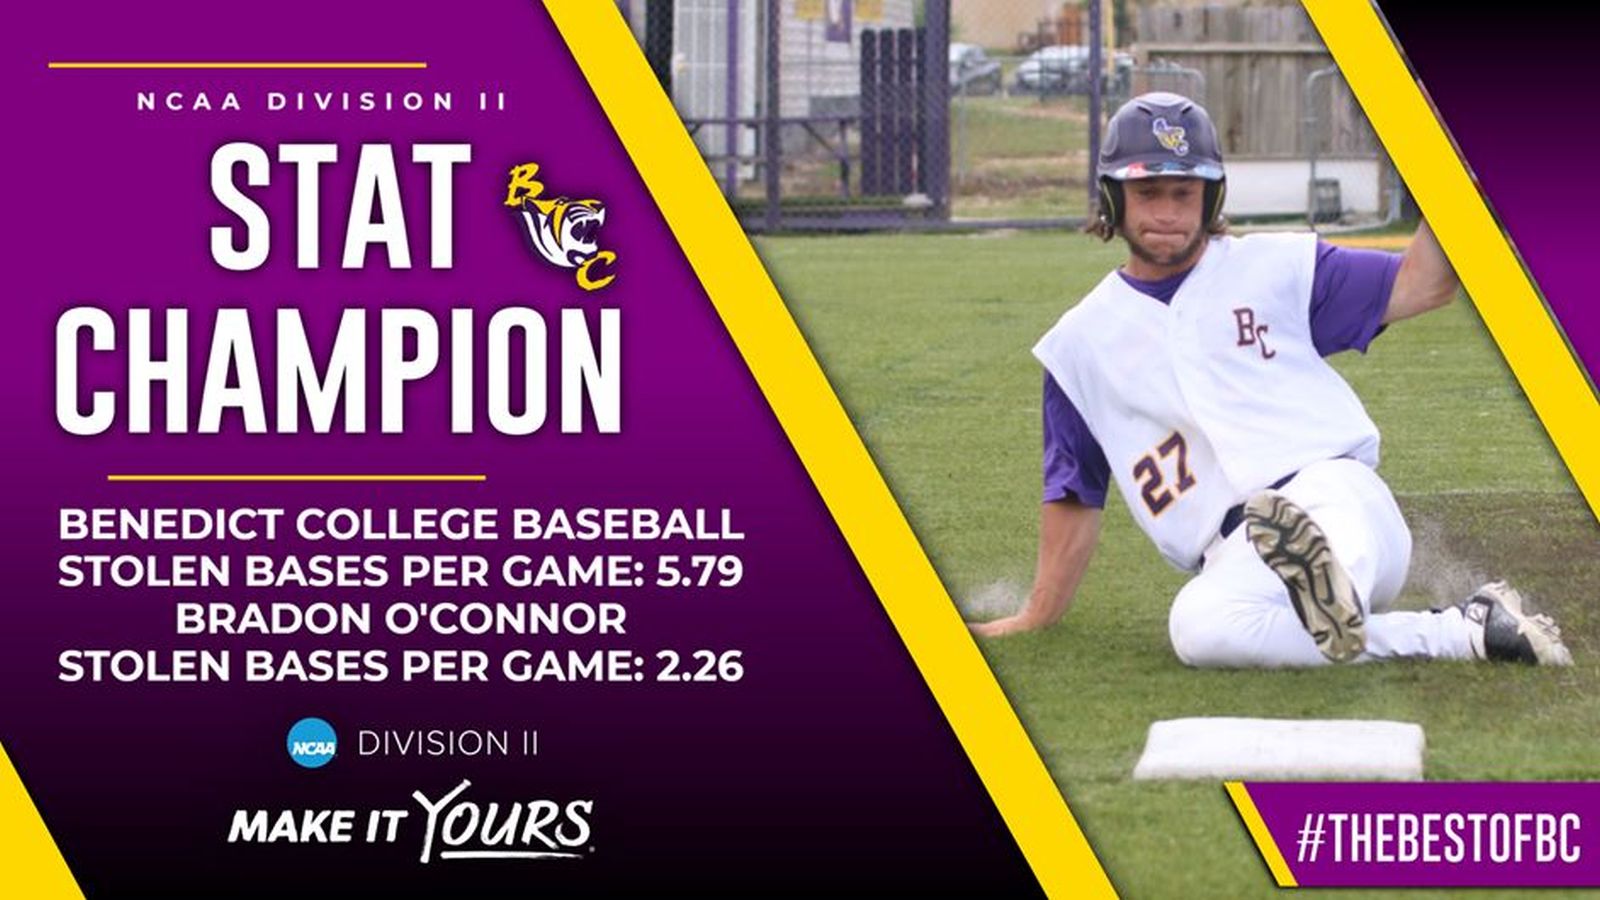 Benedict Tigers, O'Connor Named 2022 NCAA Division II Statistical Stolen Base Champions